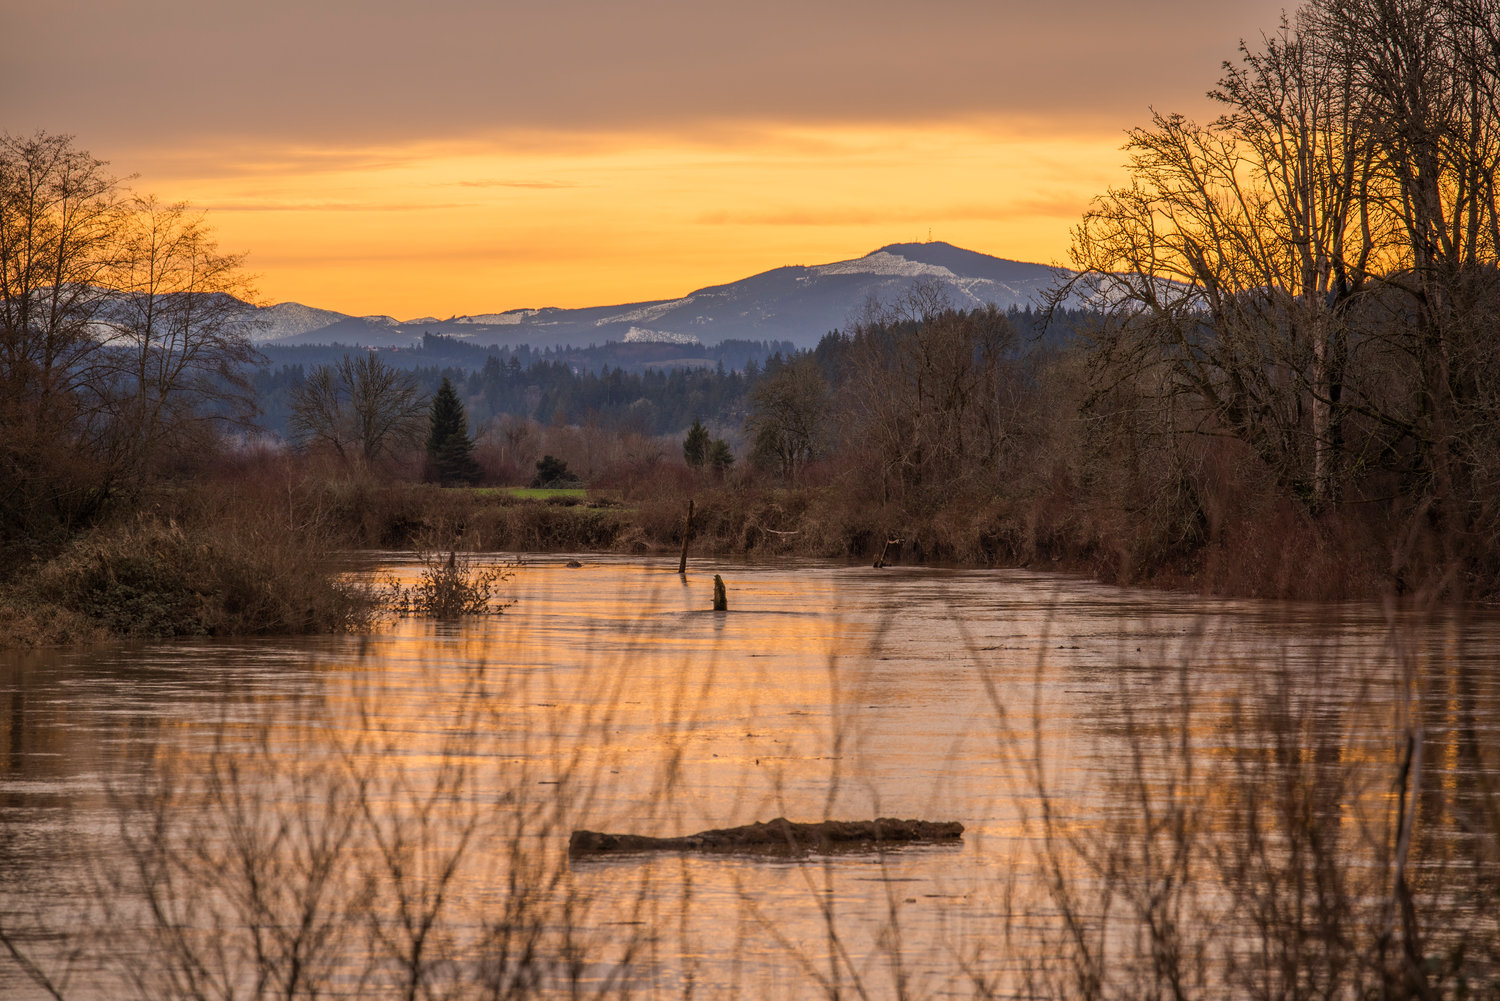 Reflections are seen in the Chehalis River as the sun sets behind the Willapa Hills Wednesday evening.